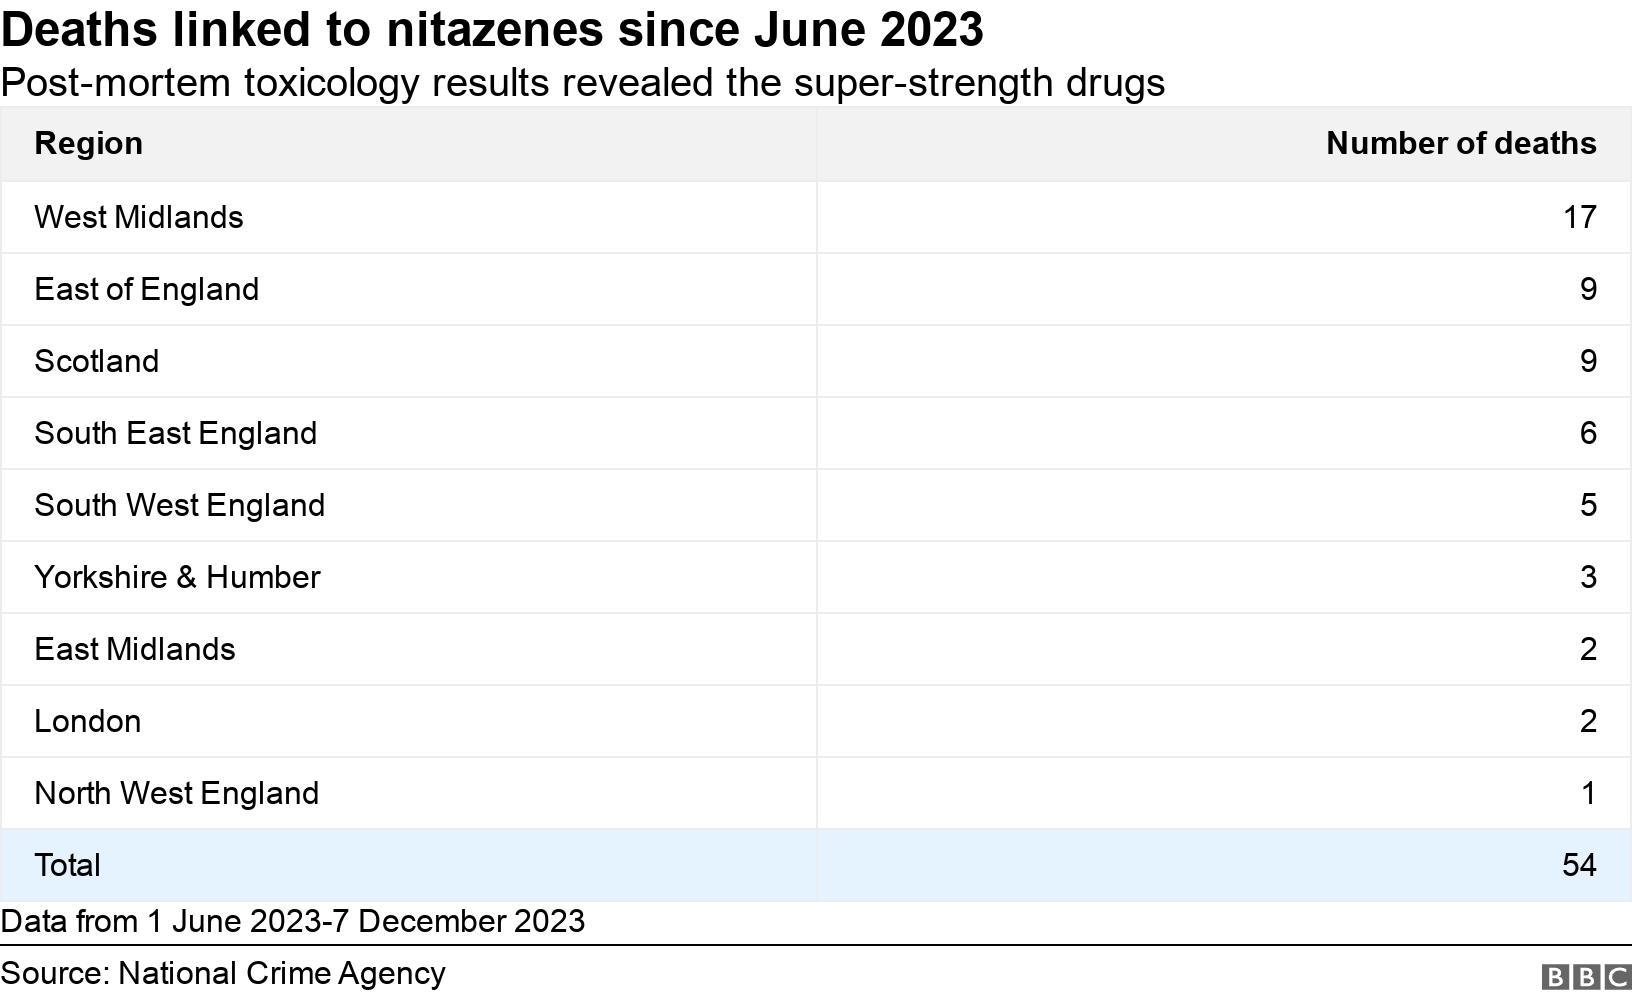 Deaths linked to nitazenes since June 2023. Post-mortem toxicology results revealed the super-strength drugs.  Data from 1 June 2023-7 December 2023.